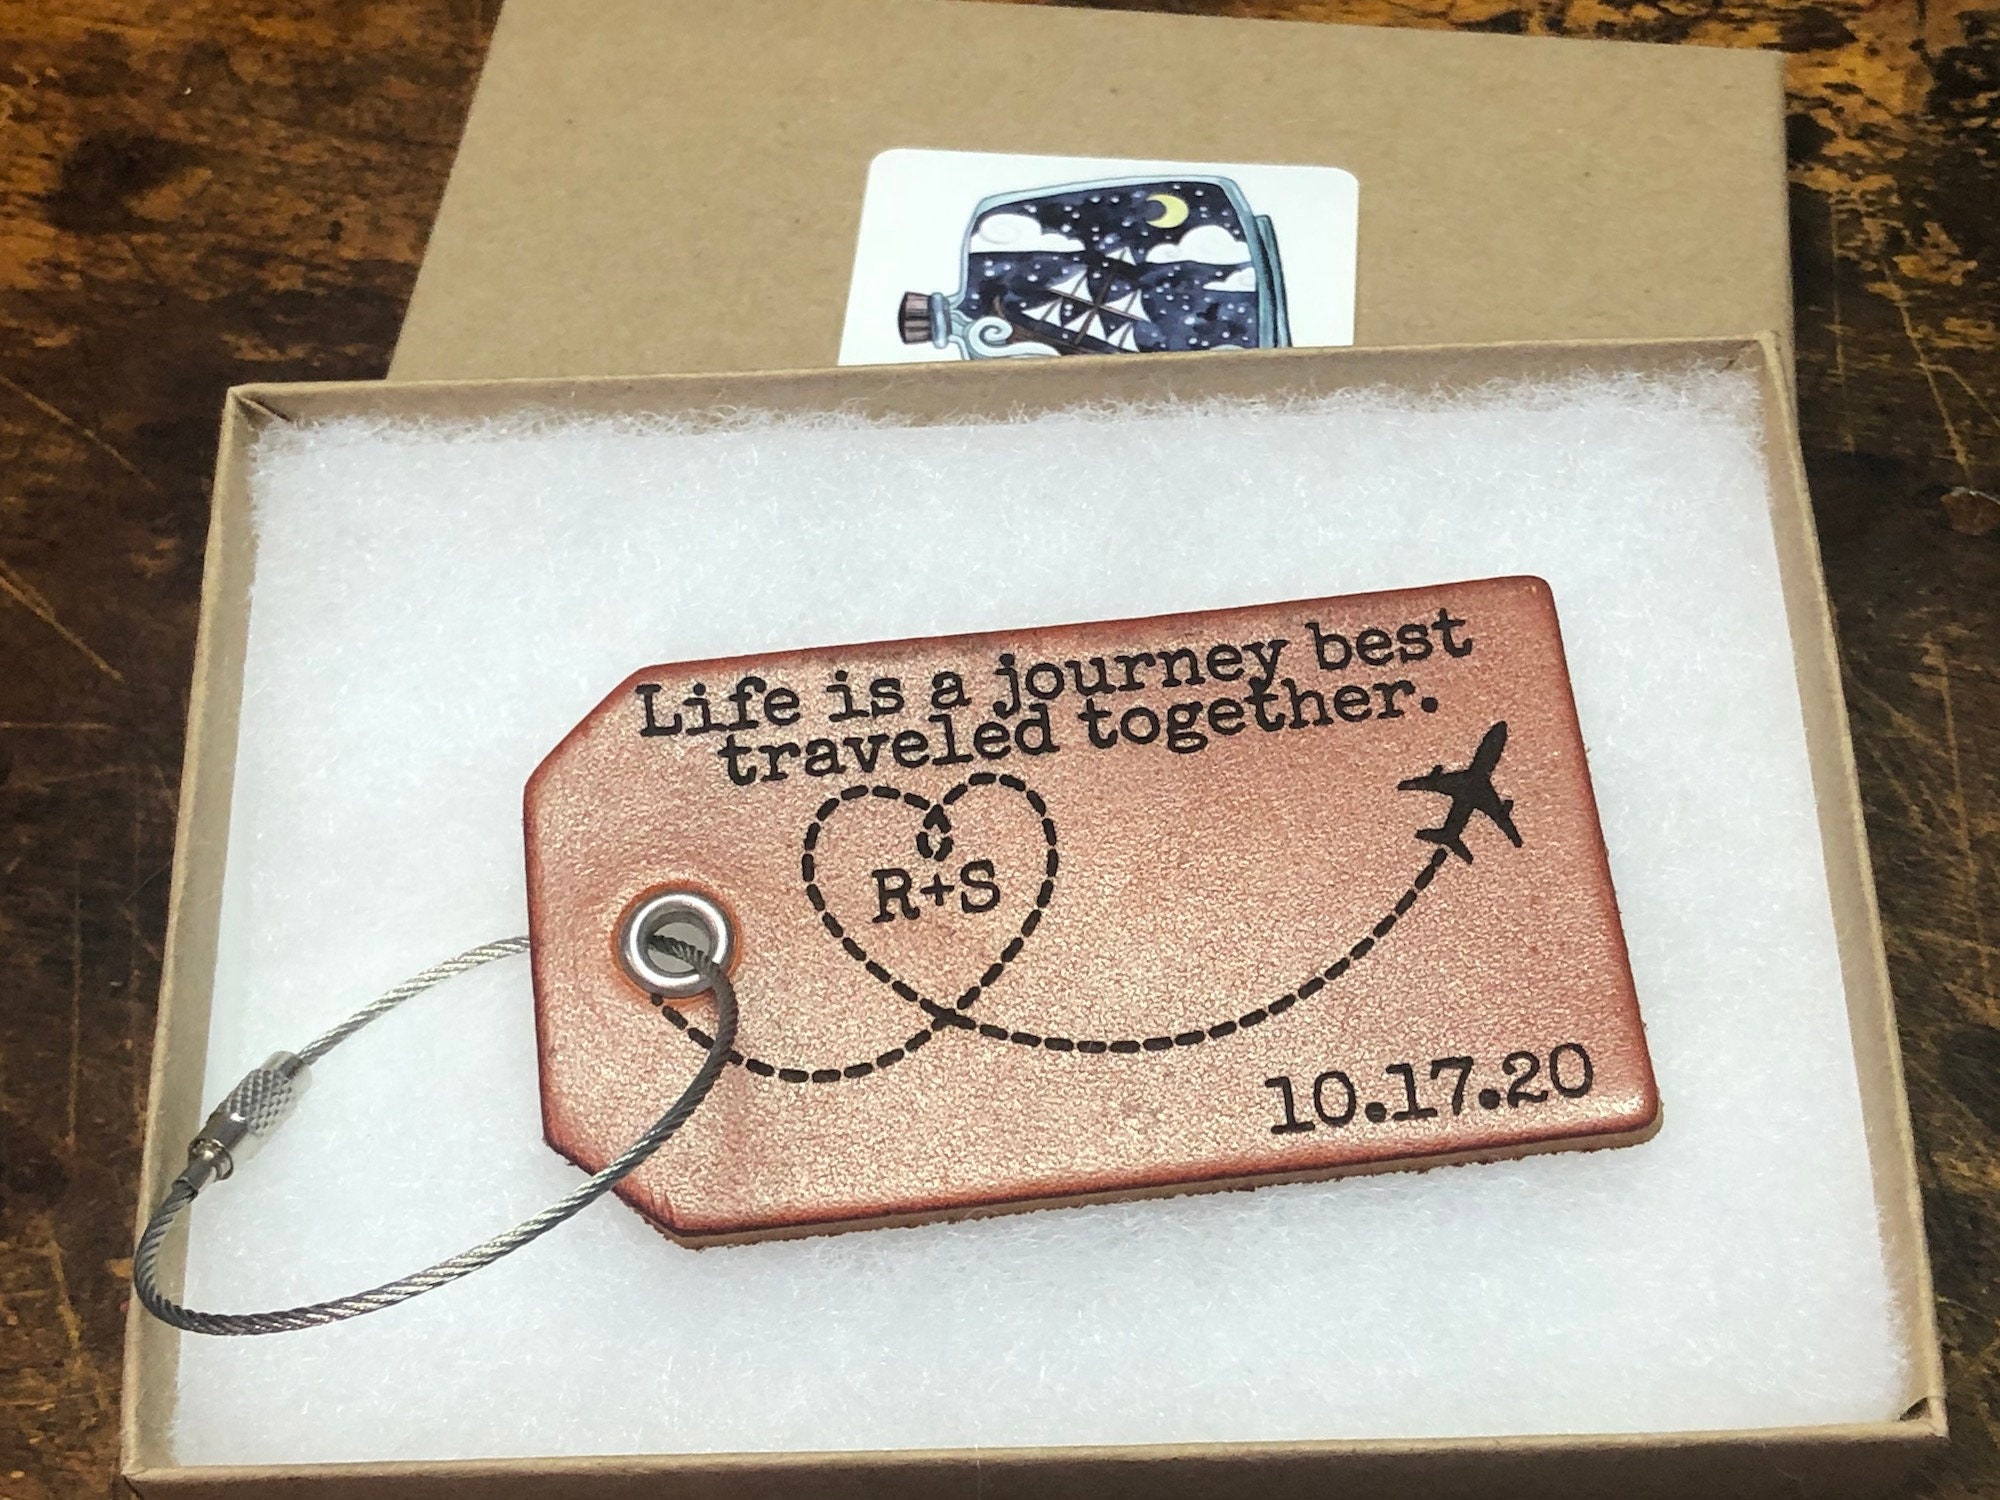 anniversary gift tag – the gifted tag